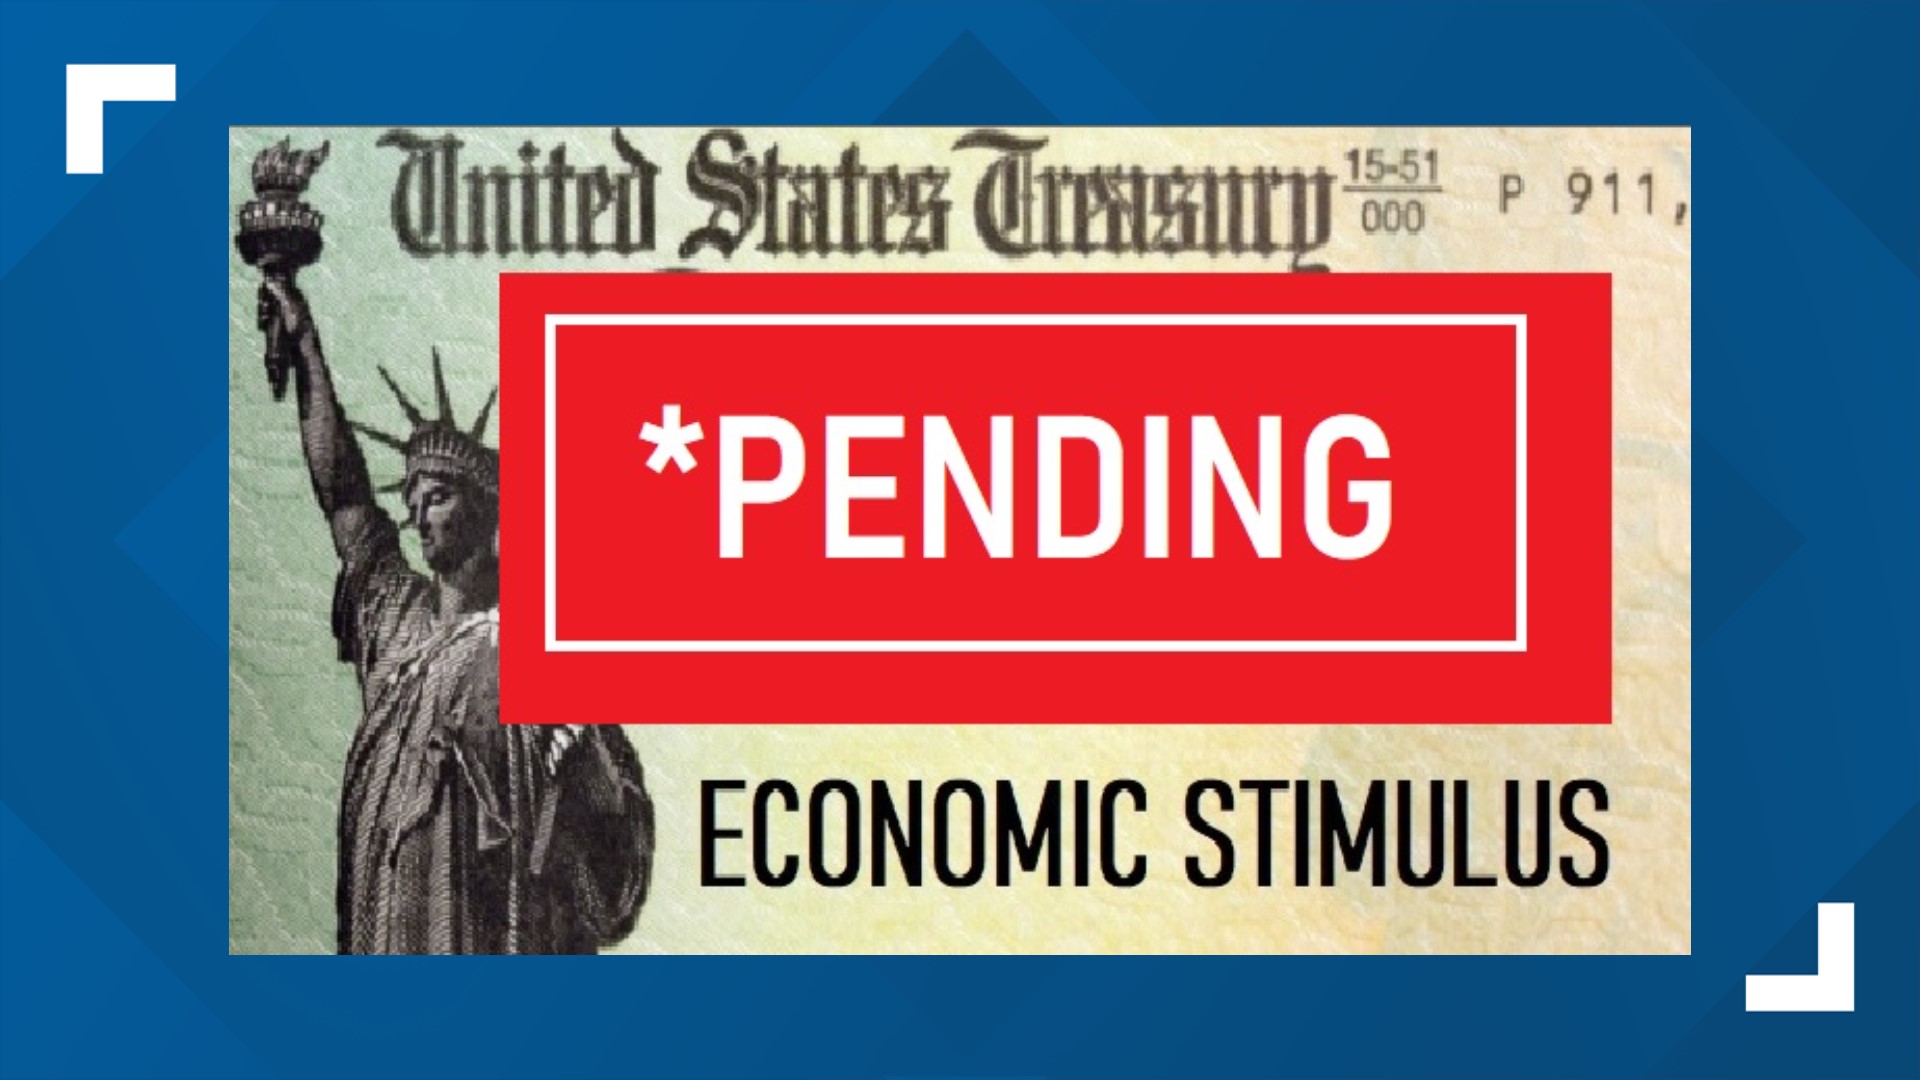 A viewer asked 2 Wants to Know if stimulus check payments are being funded by withheld 401k funds. Funds for stimulus payments come from bonds, bills and t-notes.